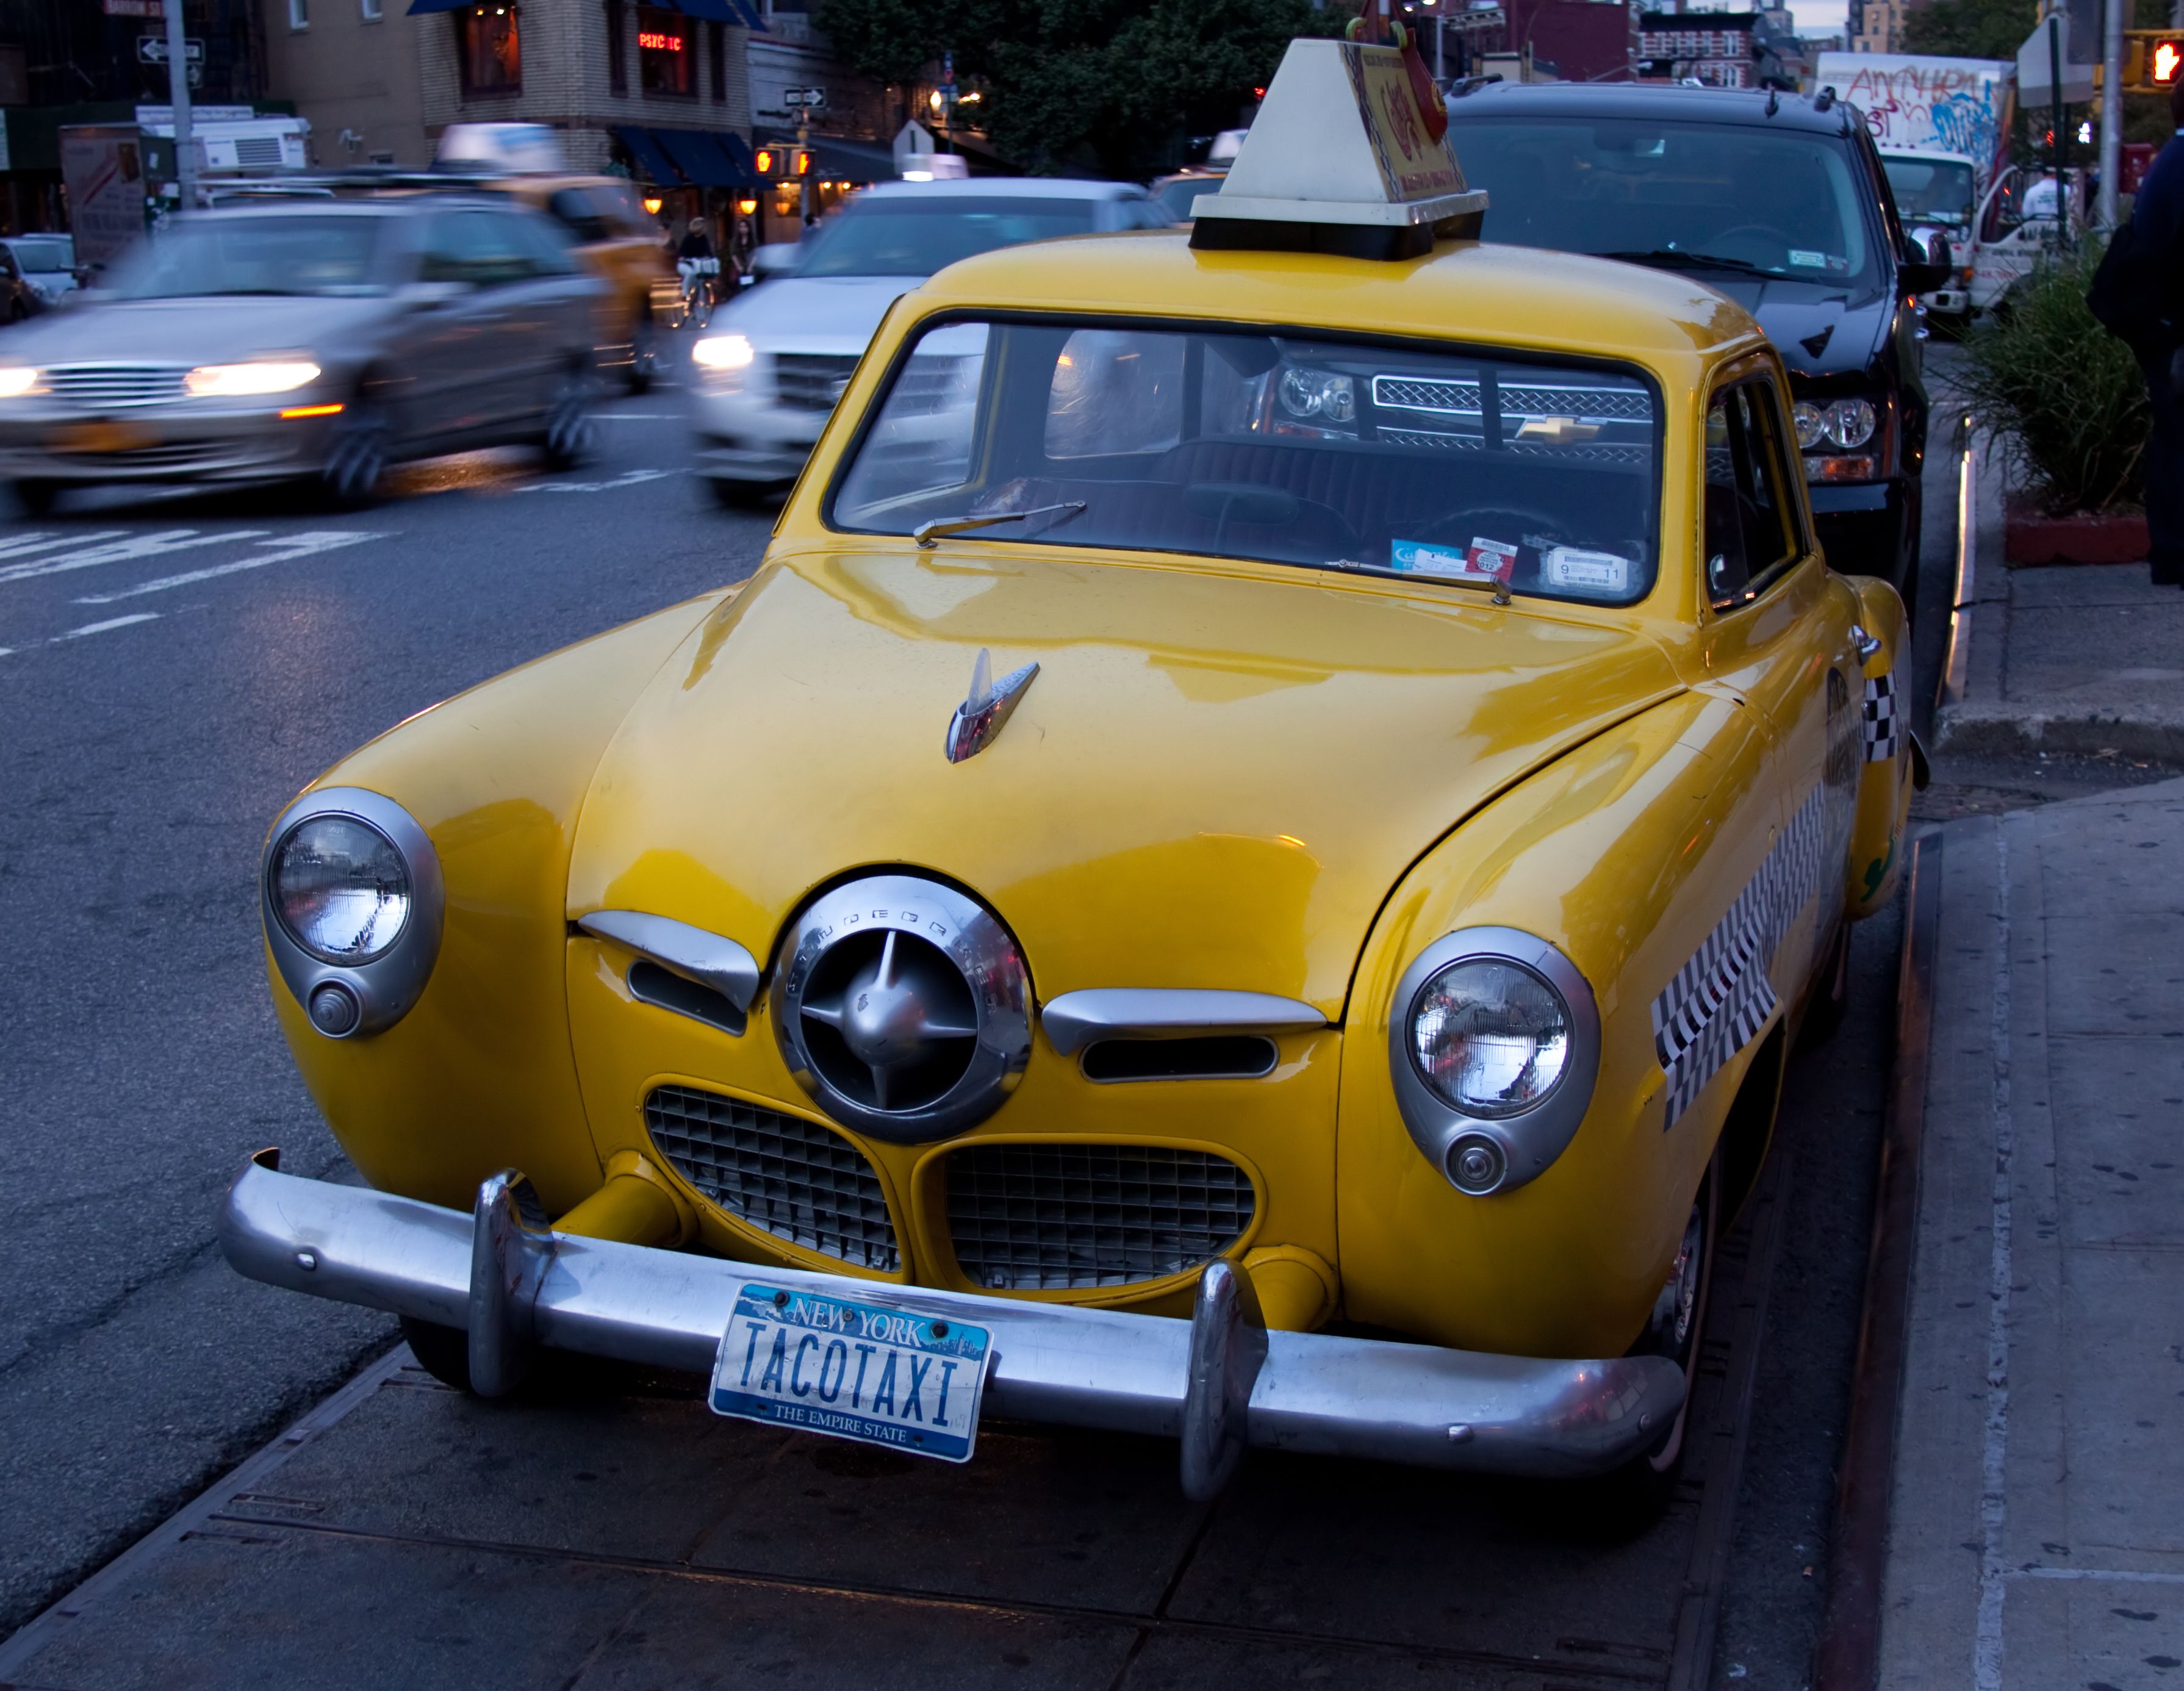 A parked Studebaker Taxi